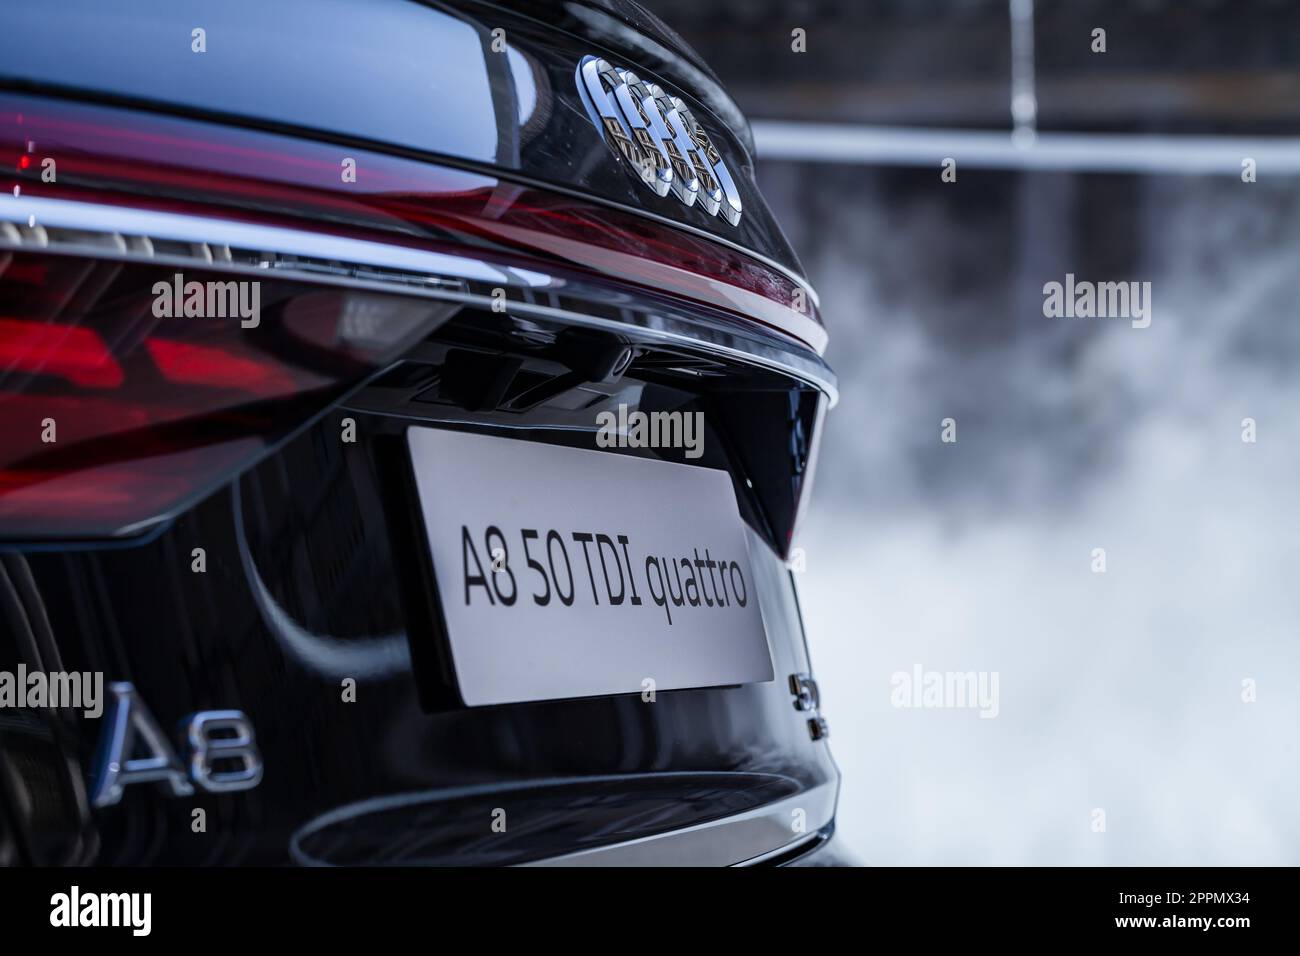 MILAN, ITALY - APRIL 16 2018: Audi city lab. Close up view of the rear of a black Audi A8 car with license plate and signal lights. Stock Photo